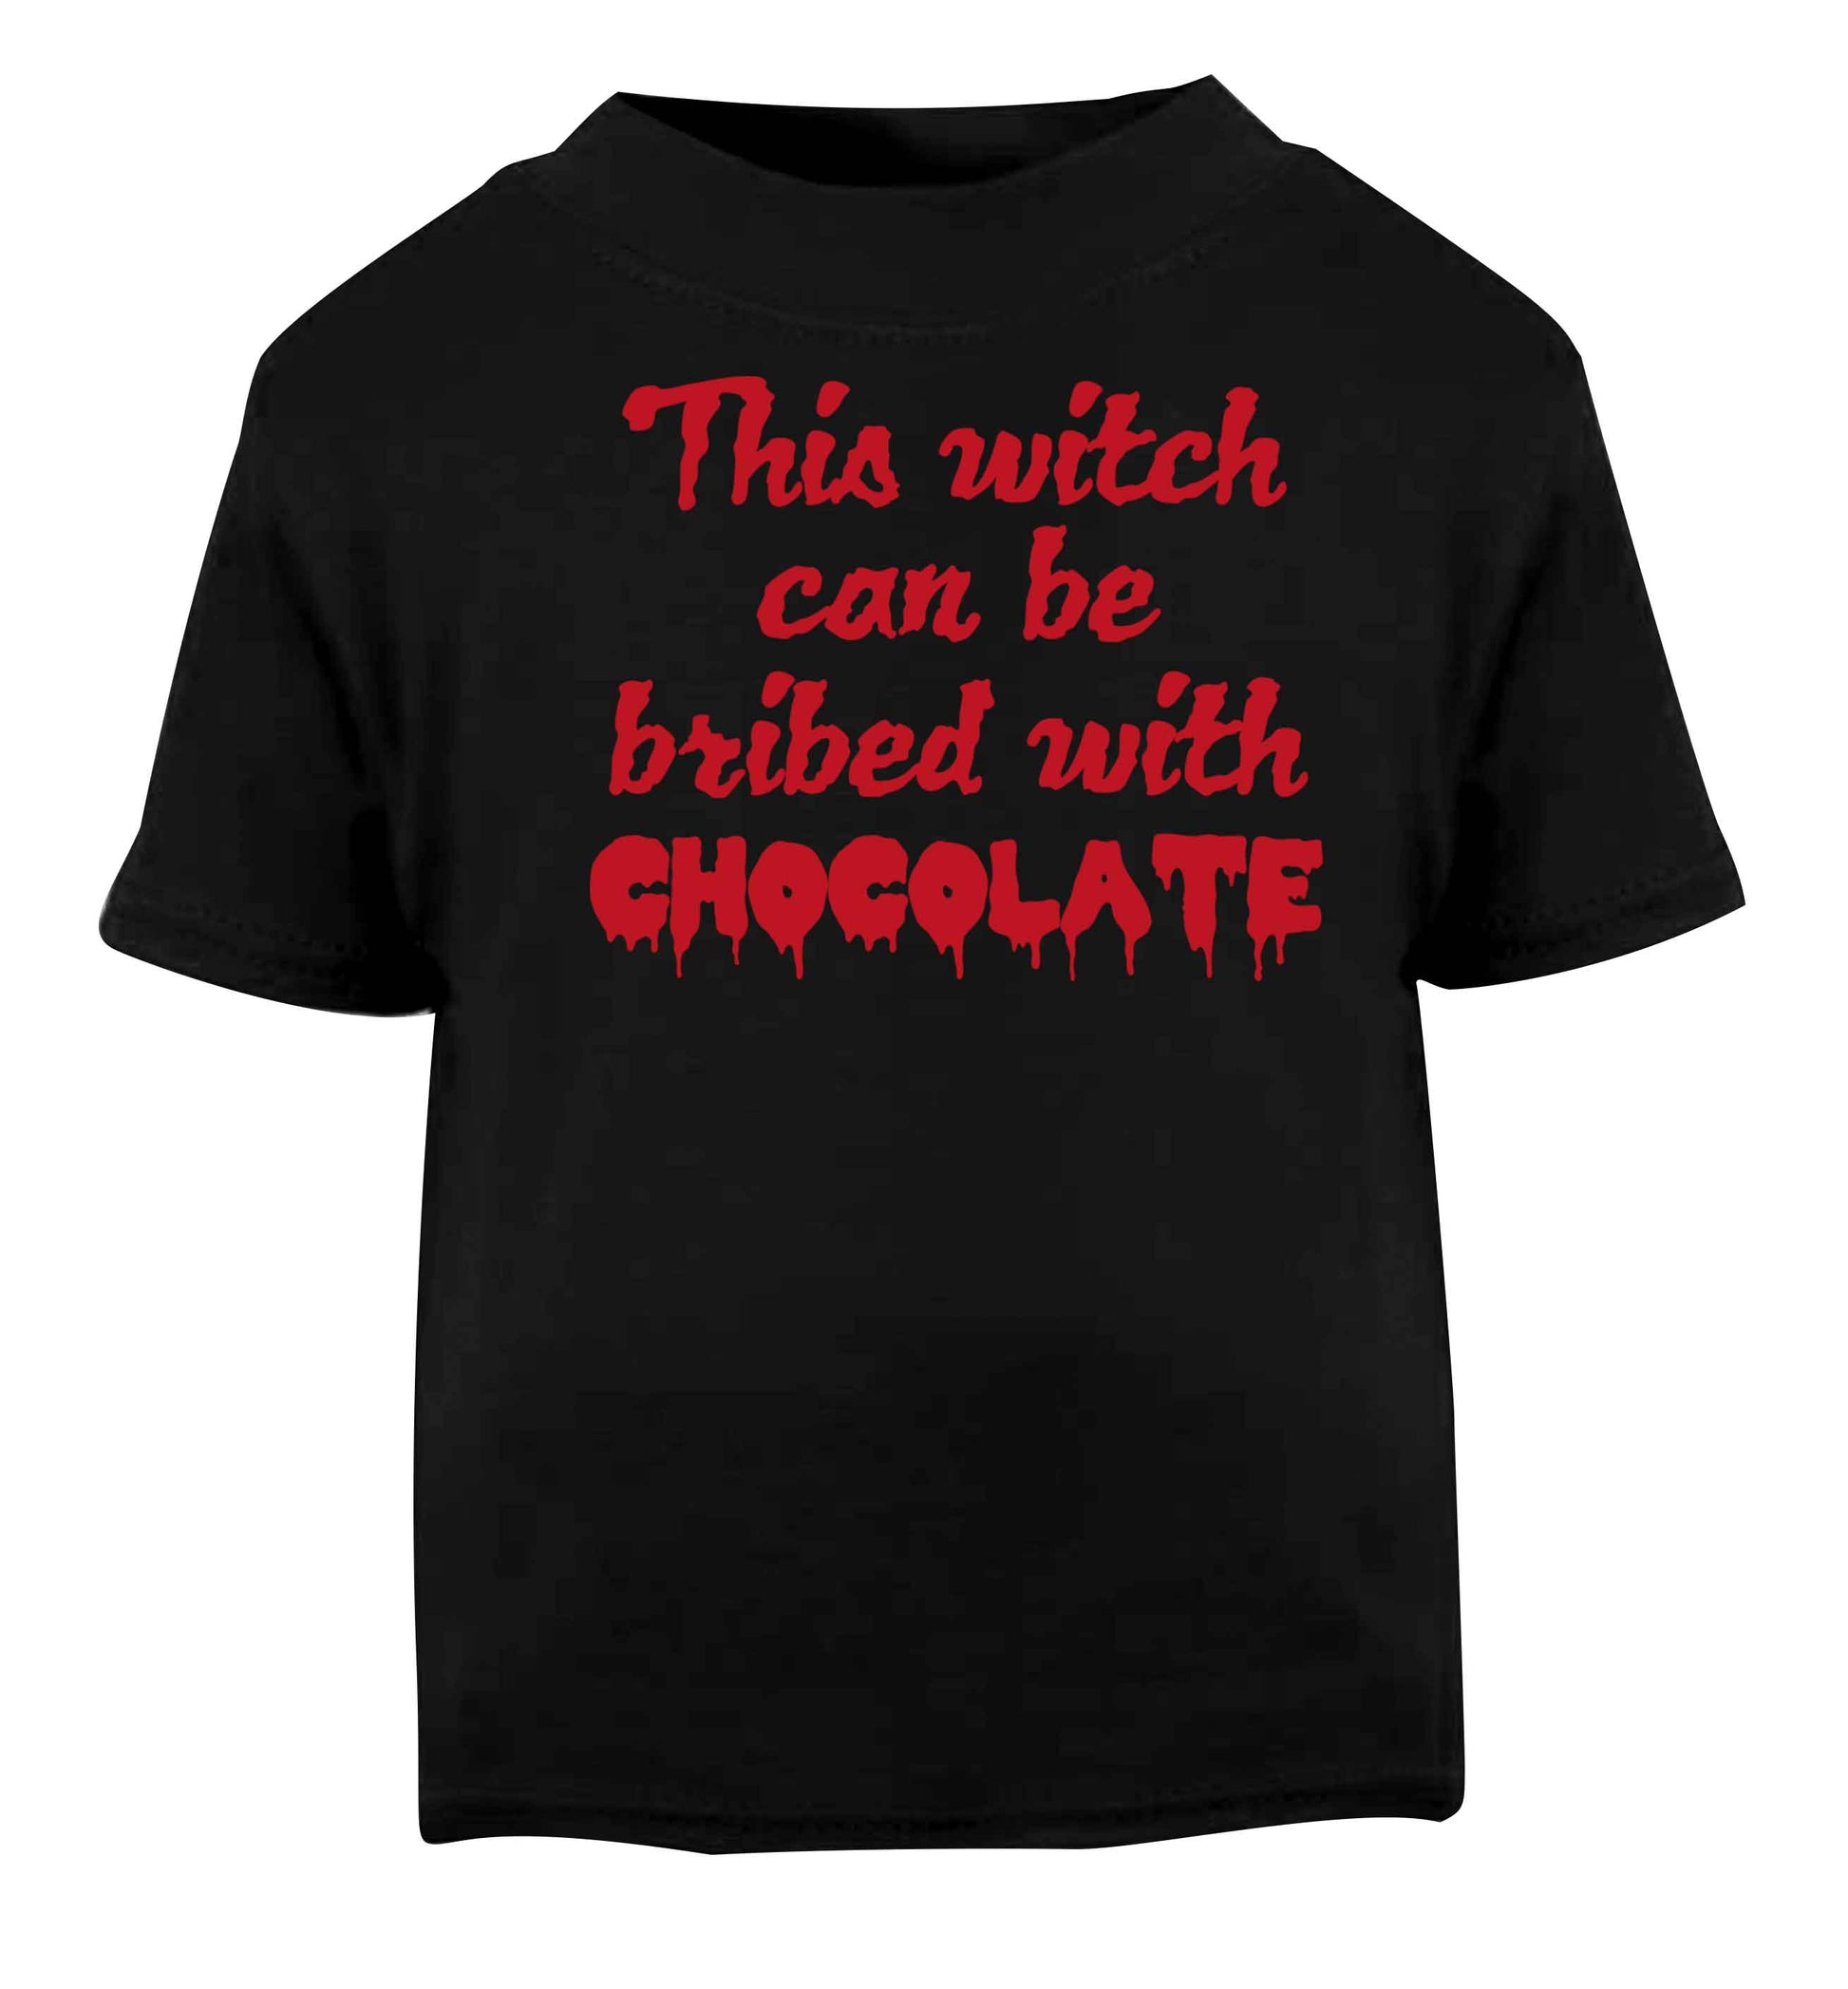 This witch can be bribed with chocolate Black baby toddler Tshirt 2 years